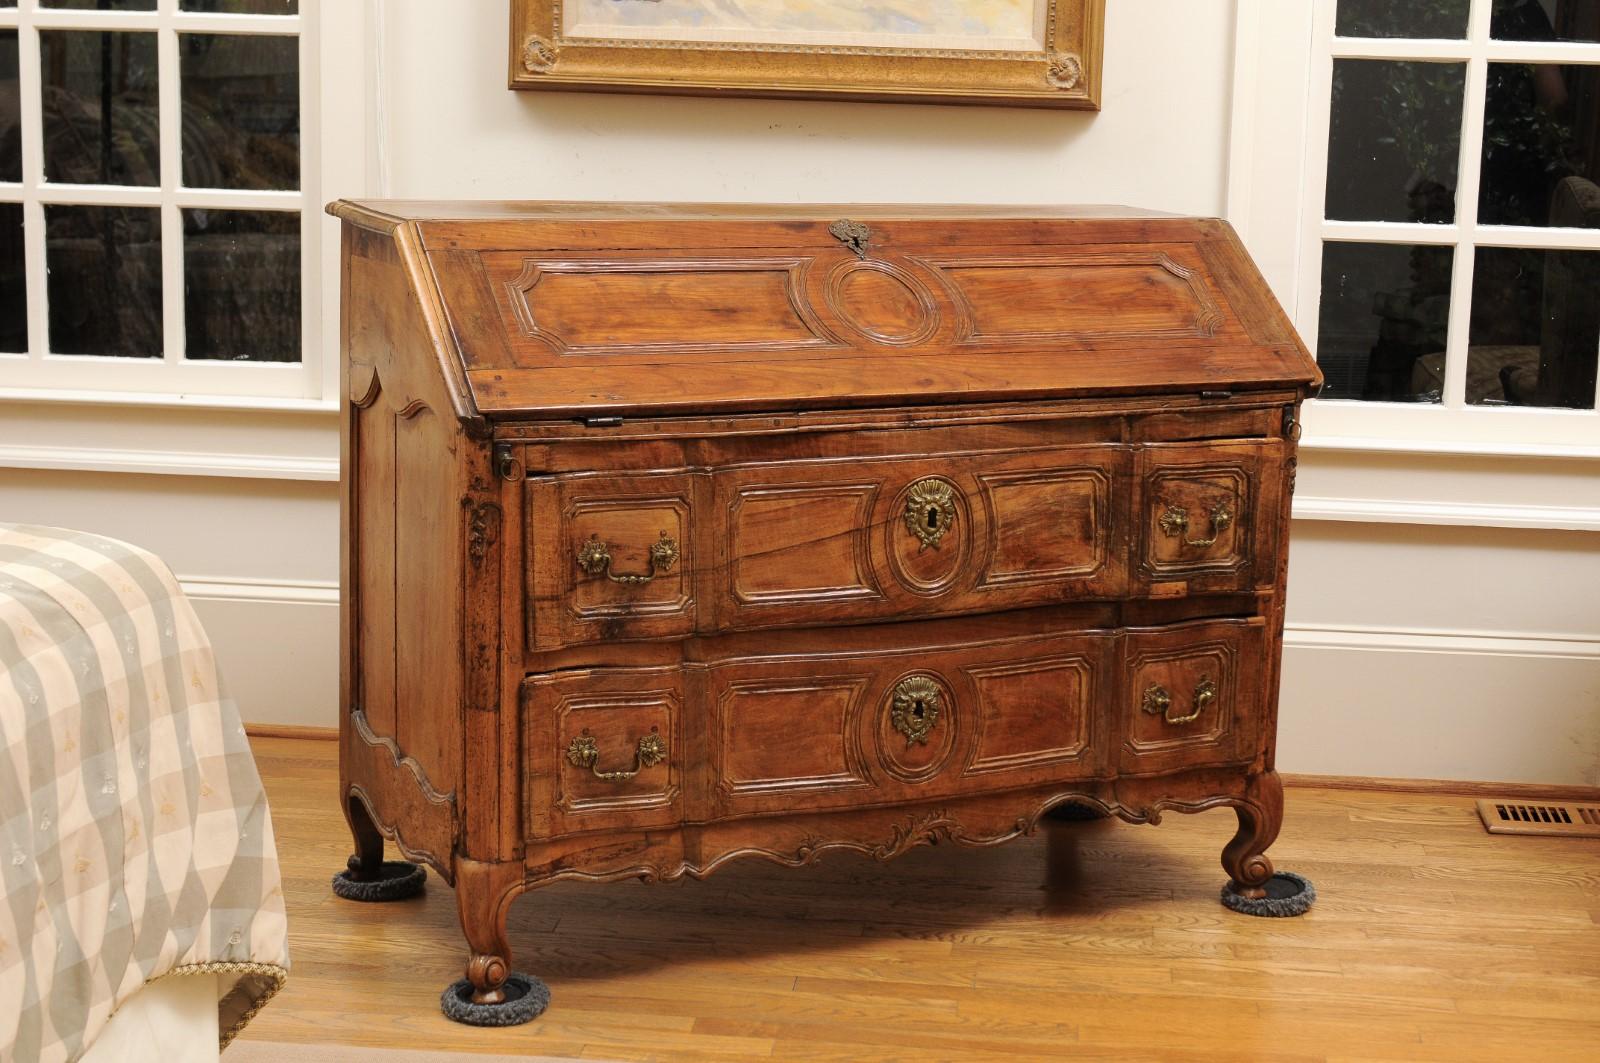 18th Century French 1780s Transition Period Walnut Slant Front Desk Commode with Drawers